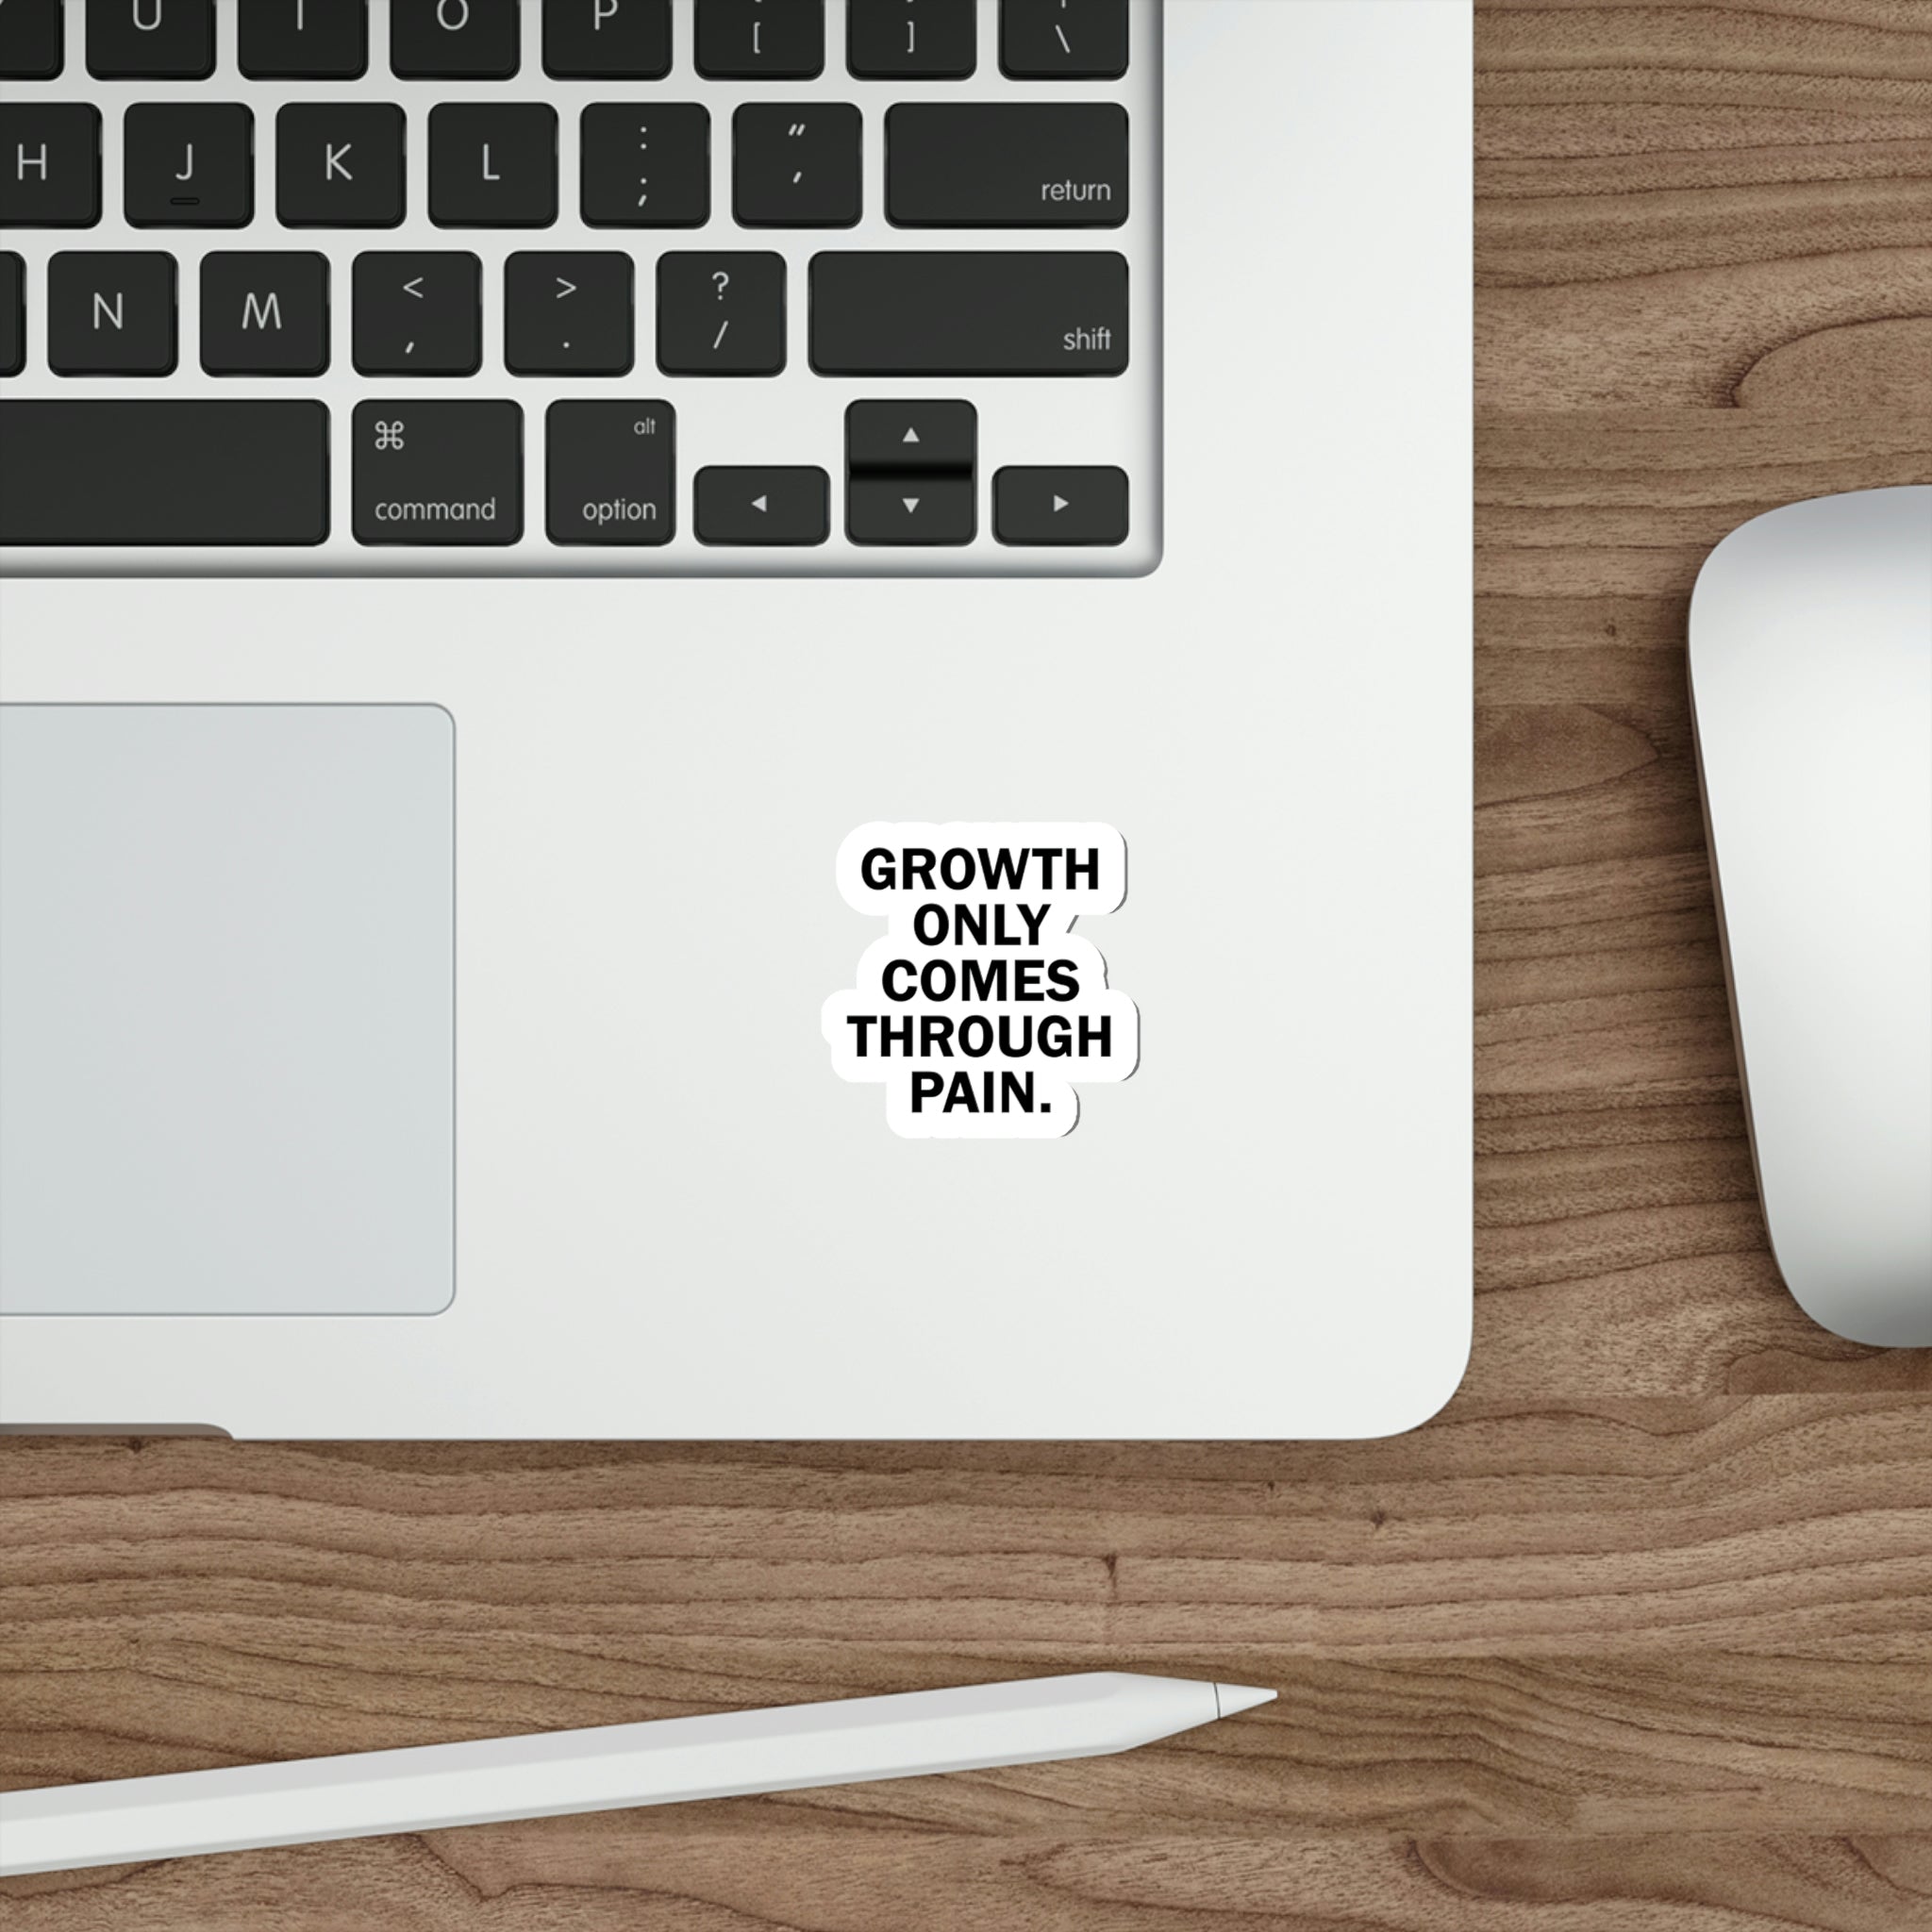 Growth only comes through pain sticker | Short deep quotes about pain #size_2x2-inches